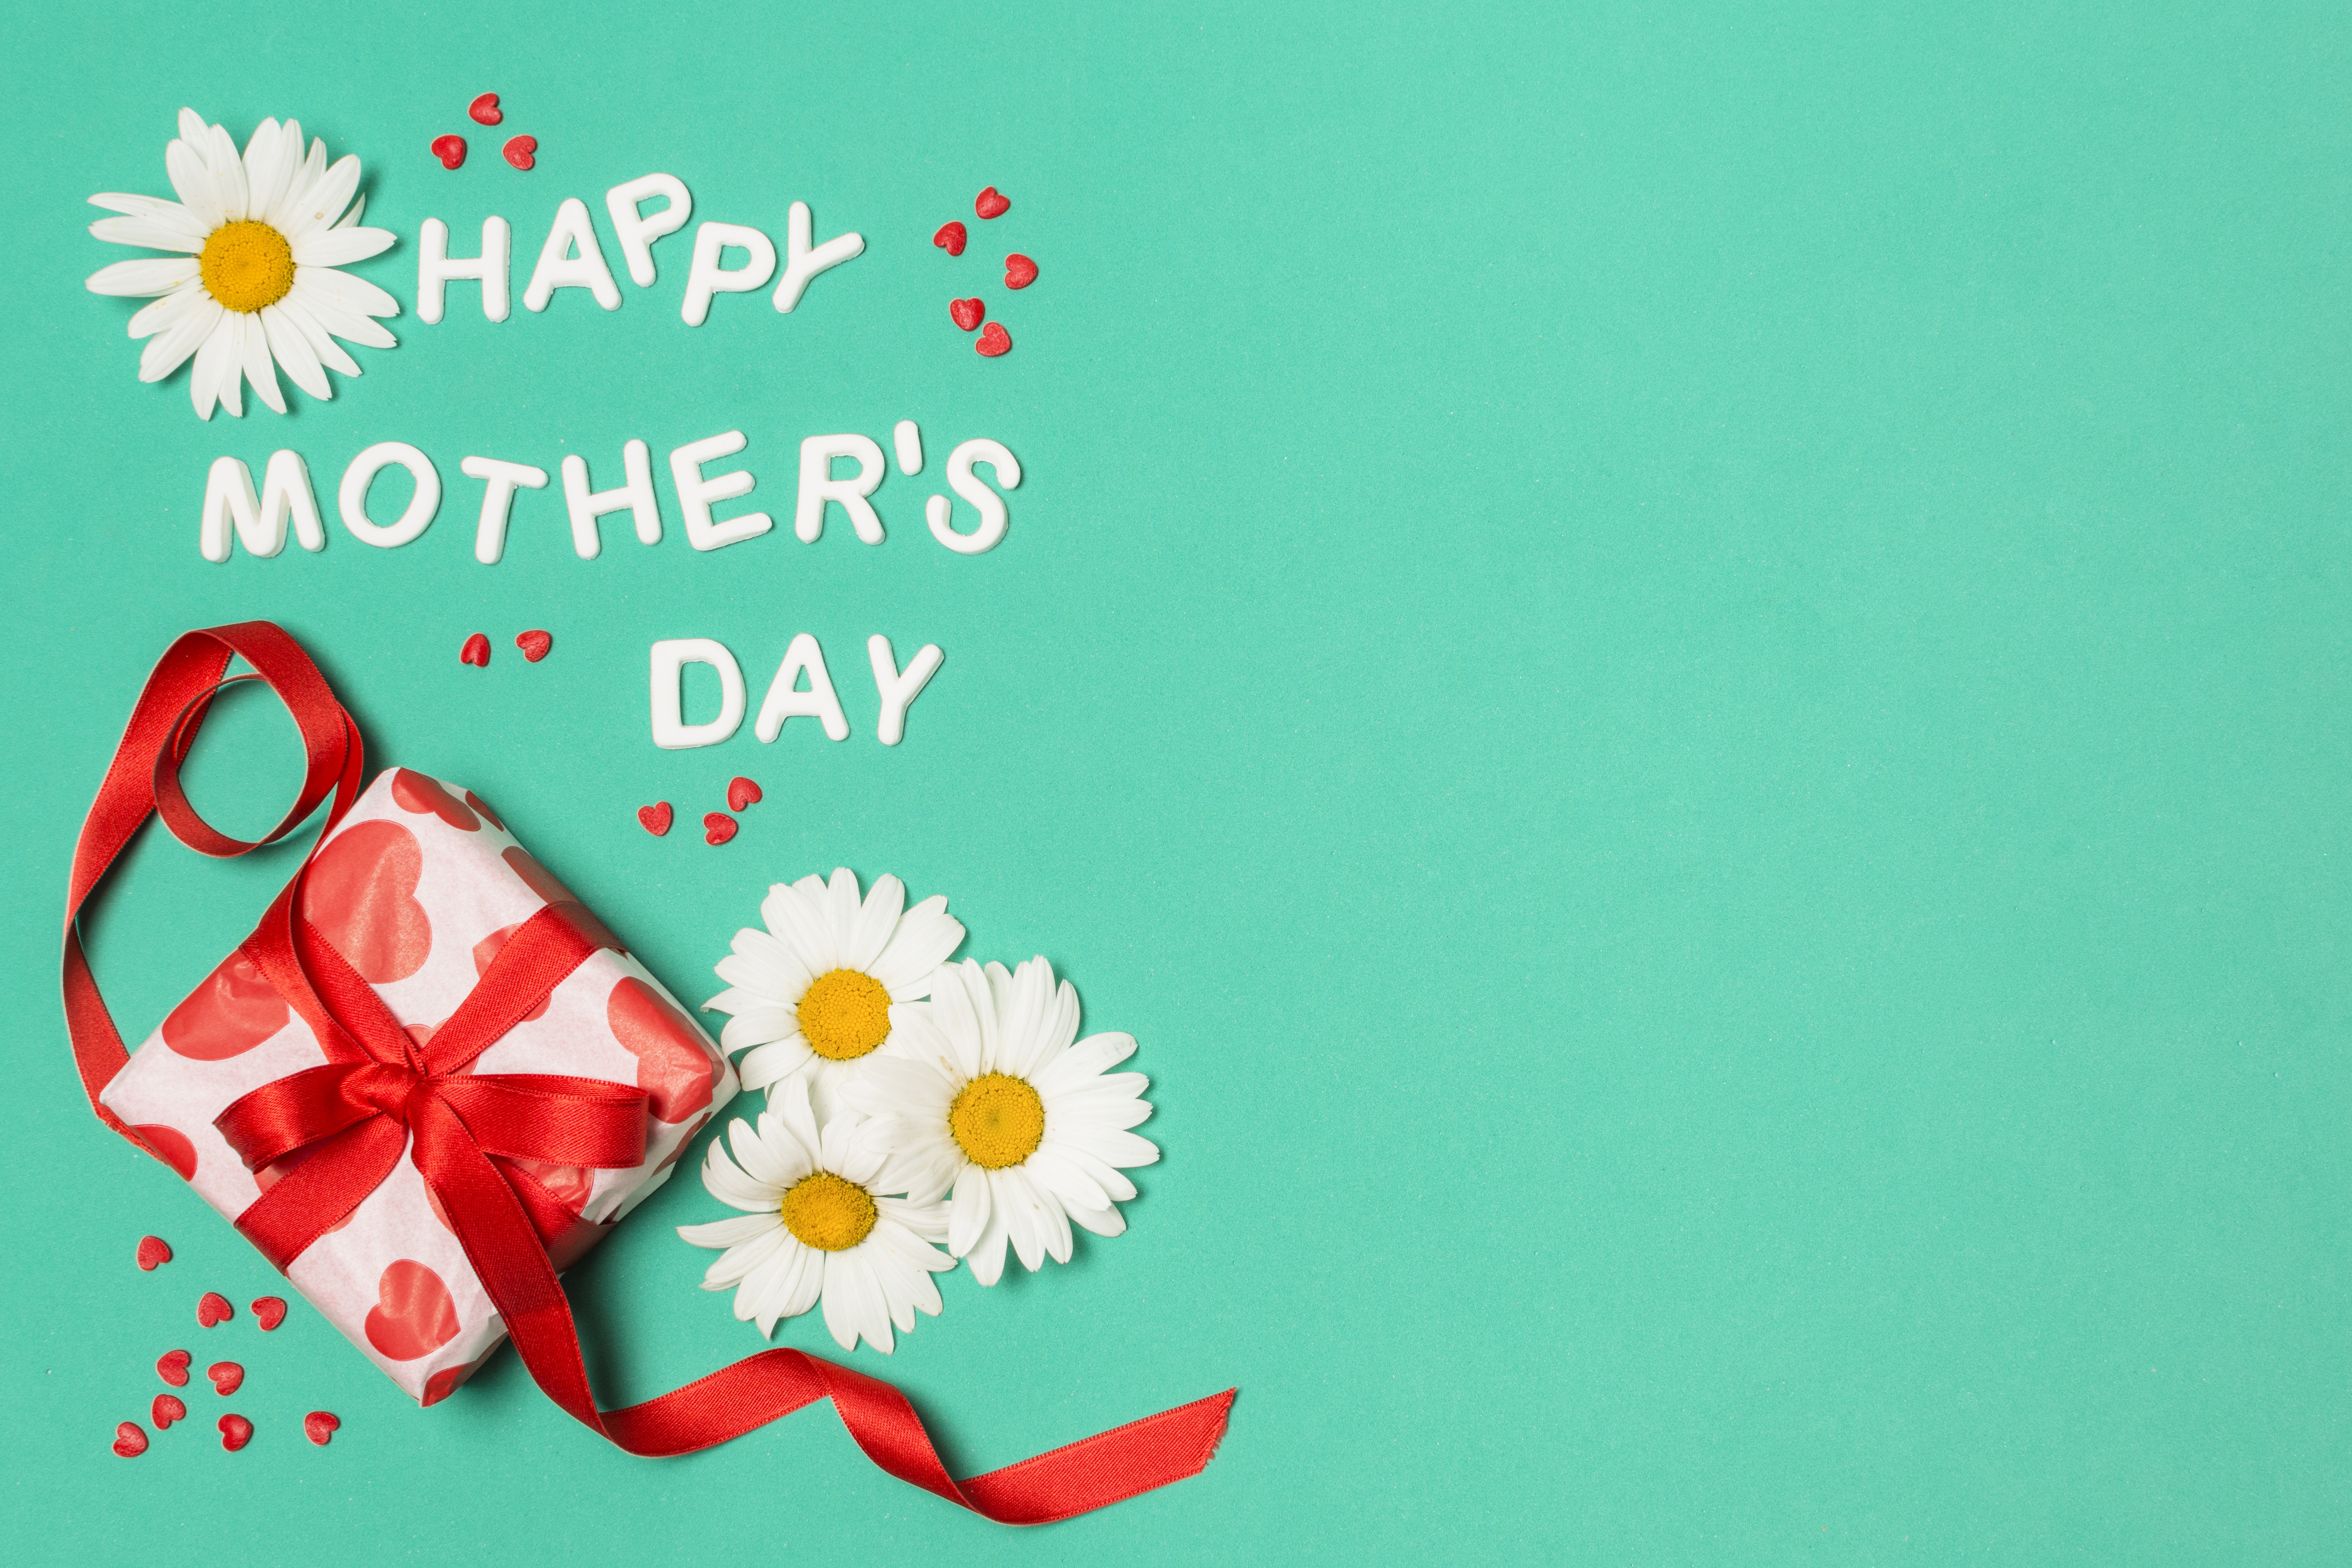 holiday, mother's day, gift, happy mother's day